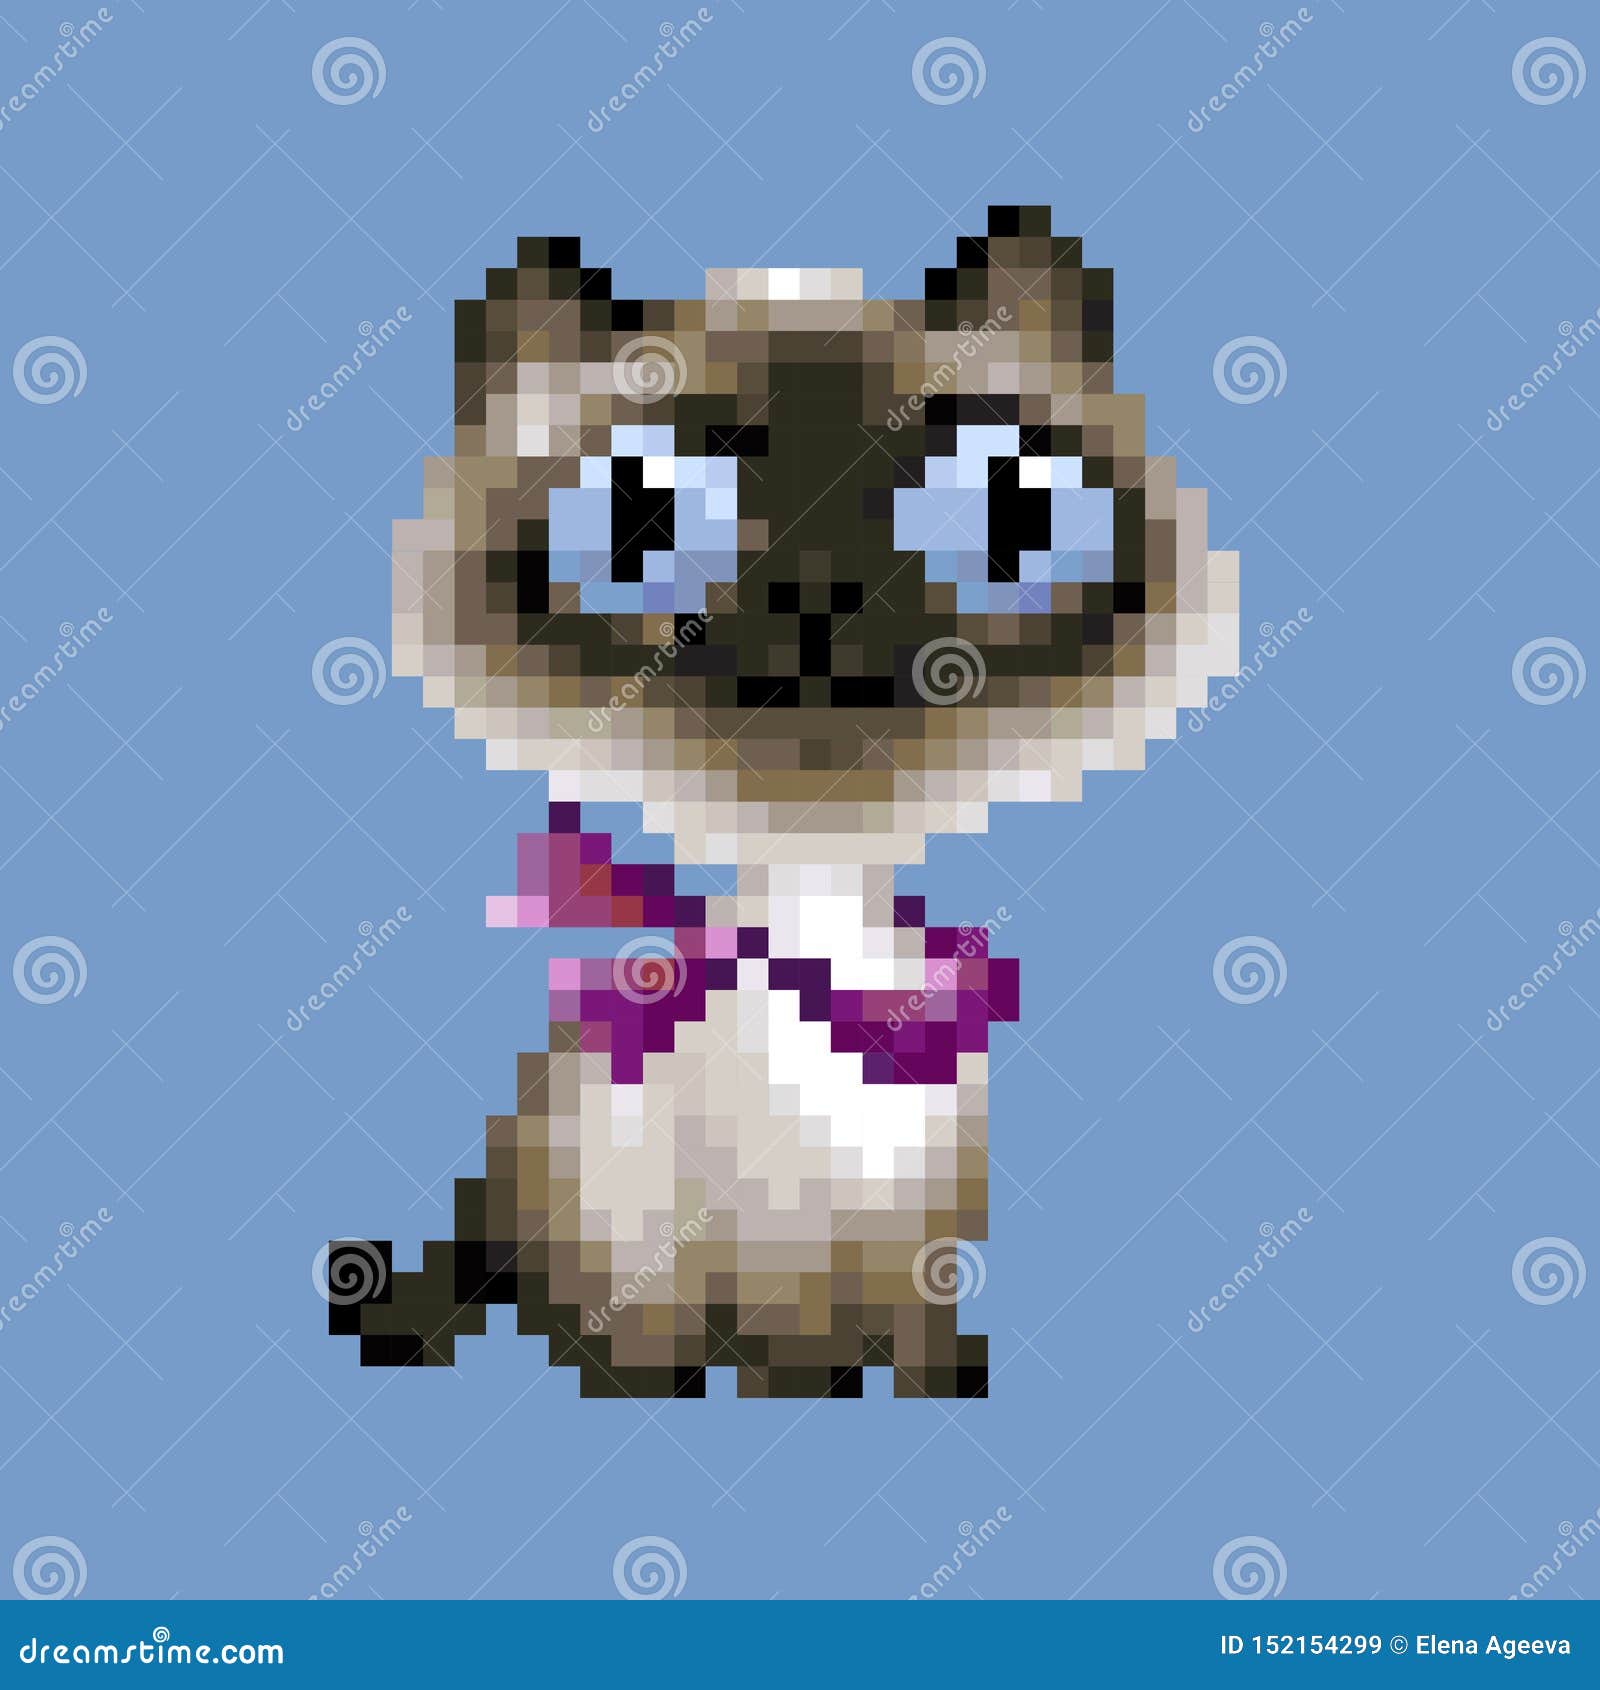 Cat Pixel Stock Vector Illustration and Royalty Free Cat Pixel Clipart